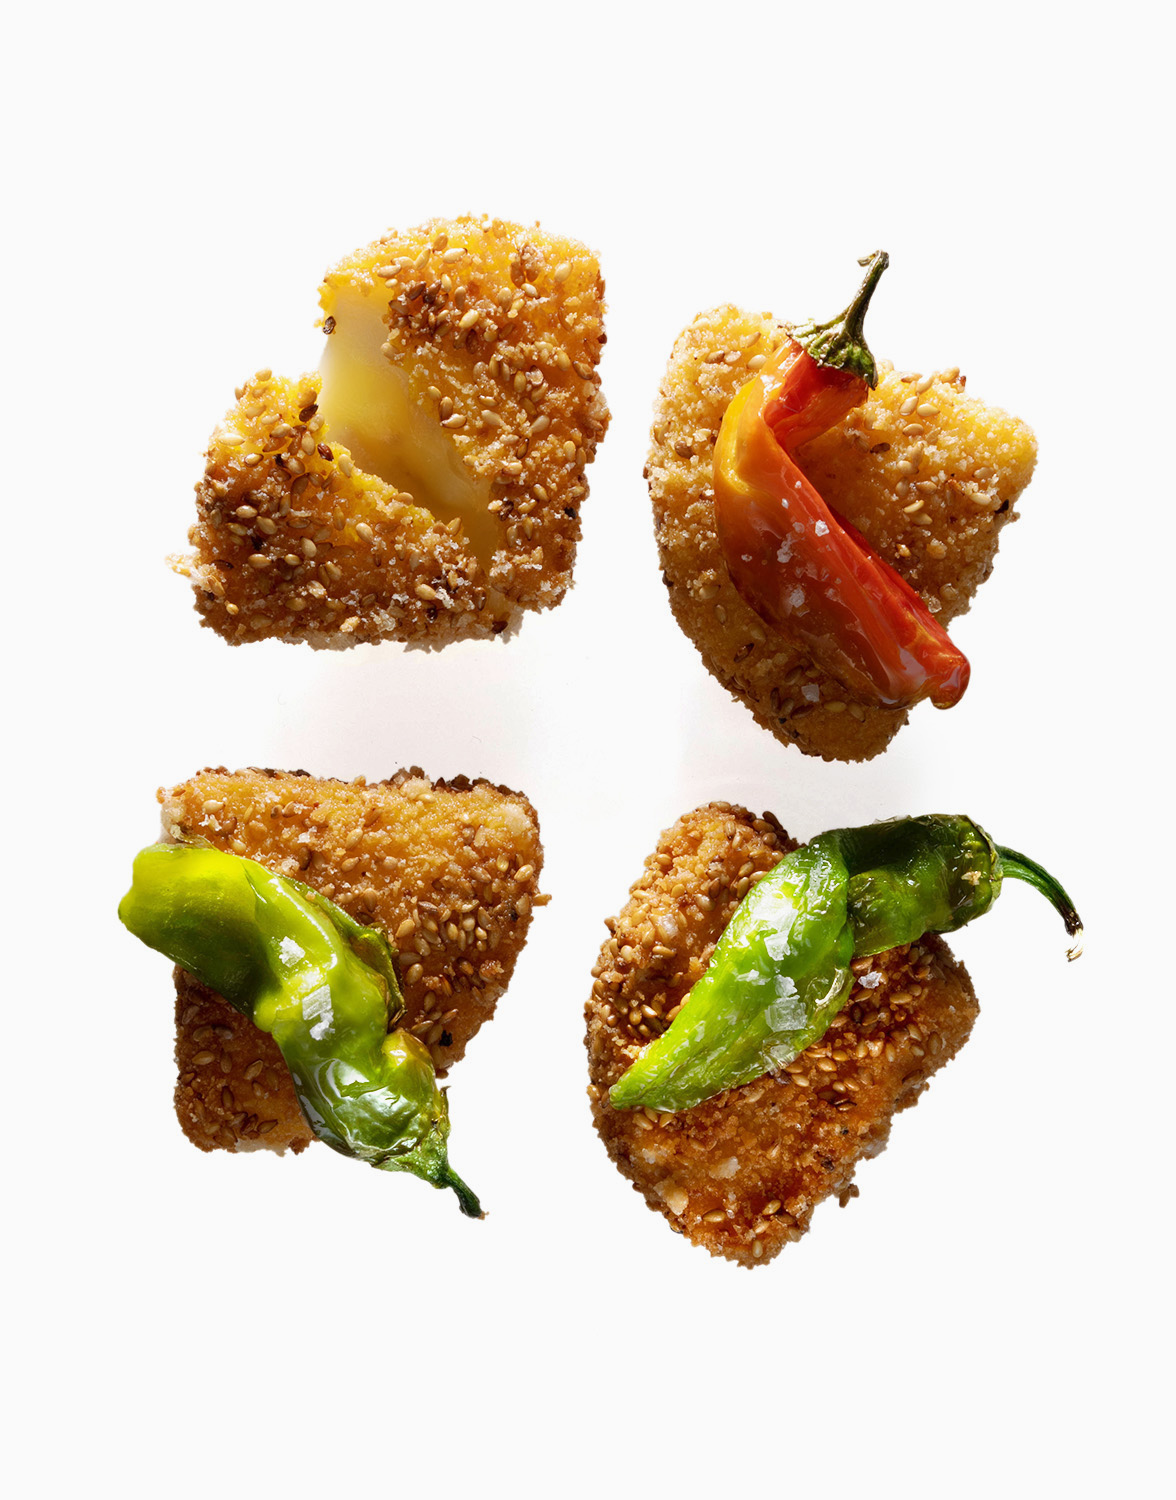 cheese nuggests with jalapenos on white background